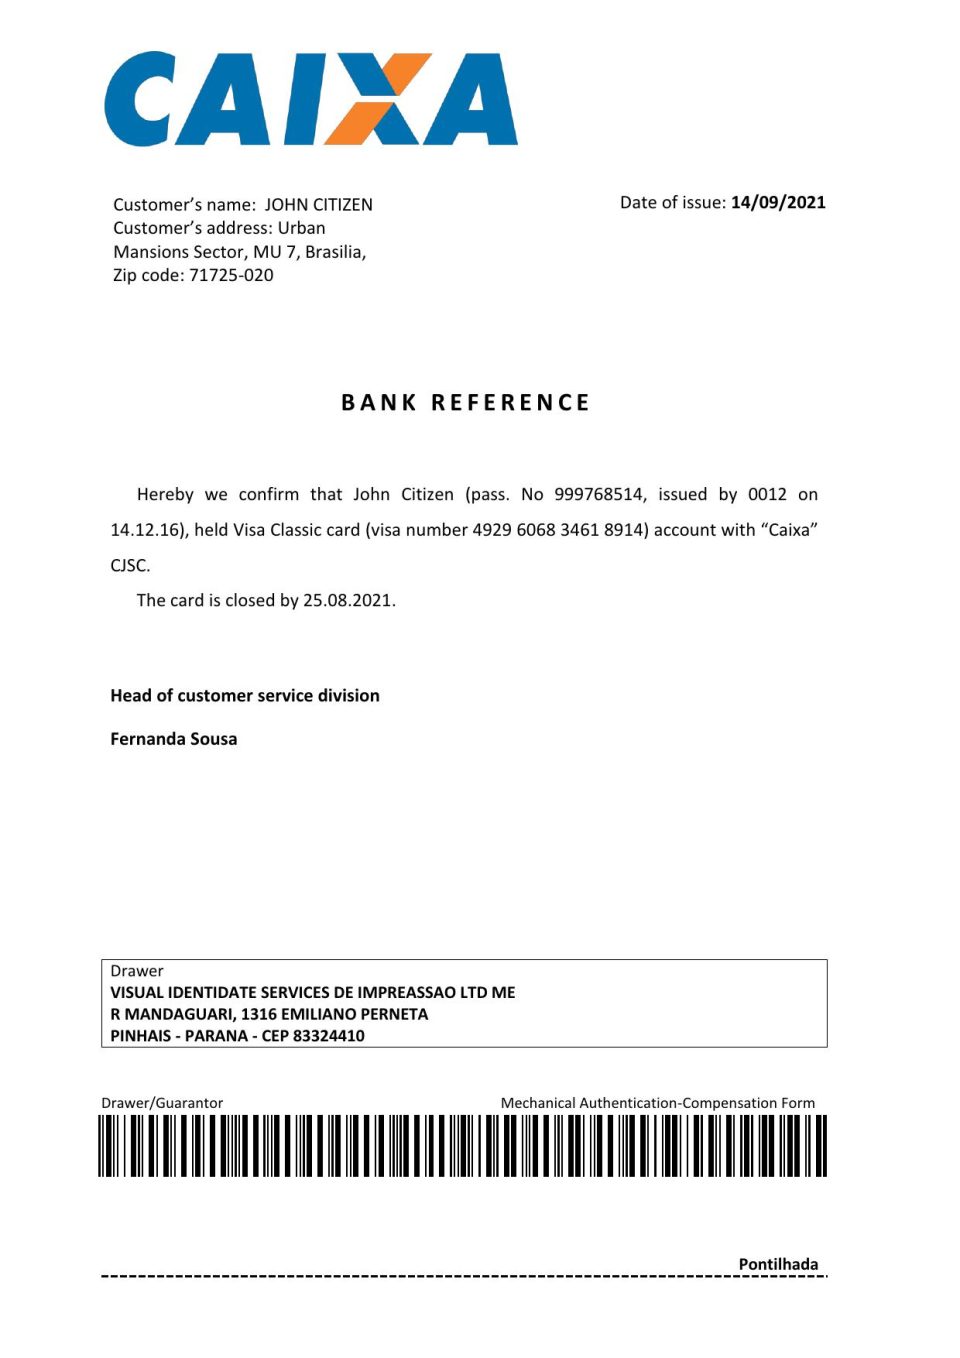 Download Brazil Caixa Bank Reference Letter Templates | Editable Word